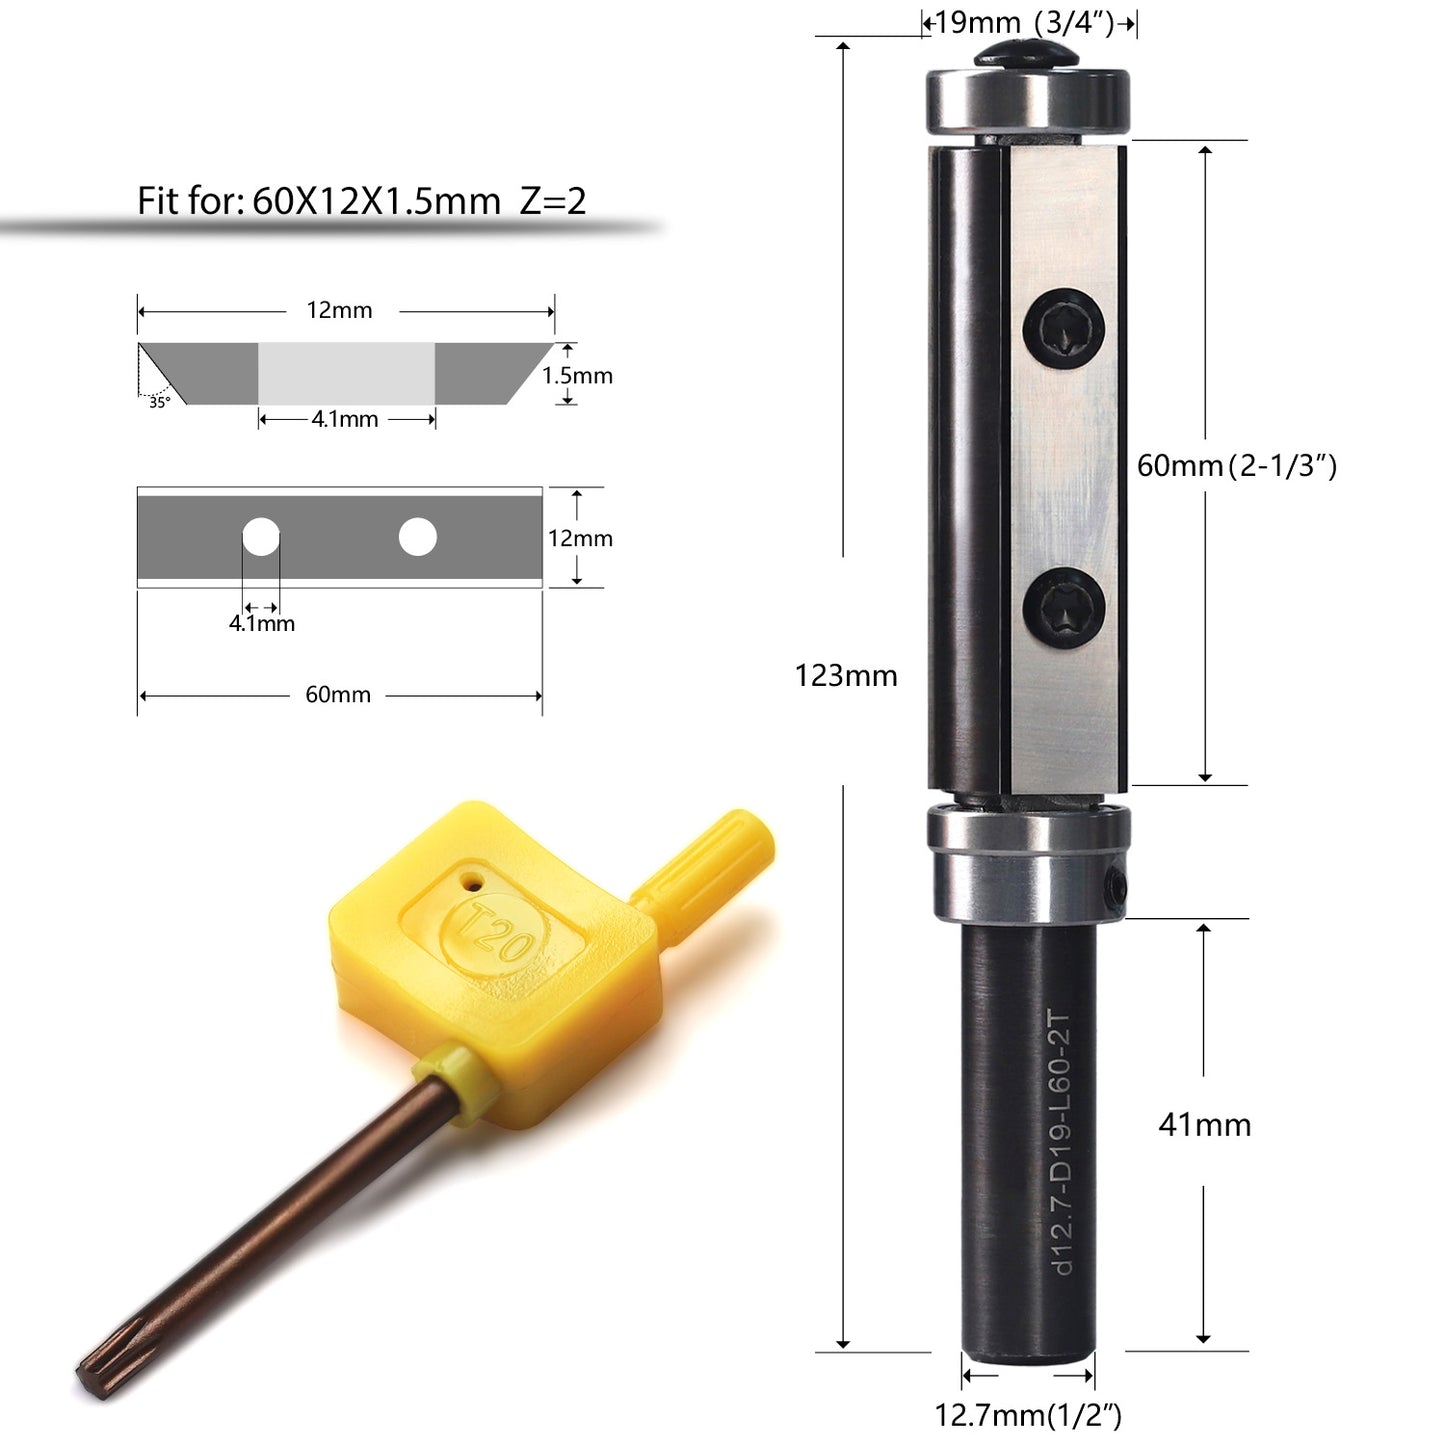 yeptooling double bearing flush trim router bit milling cutter for woodworking trimming, 1/2 inch shank diameter, 3/4 inch cutting diameter, 2-1/3 inch cutting length, 4-4/5 inch overall length 